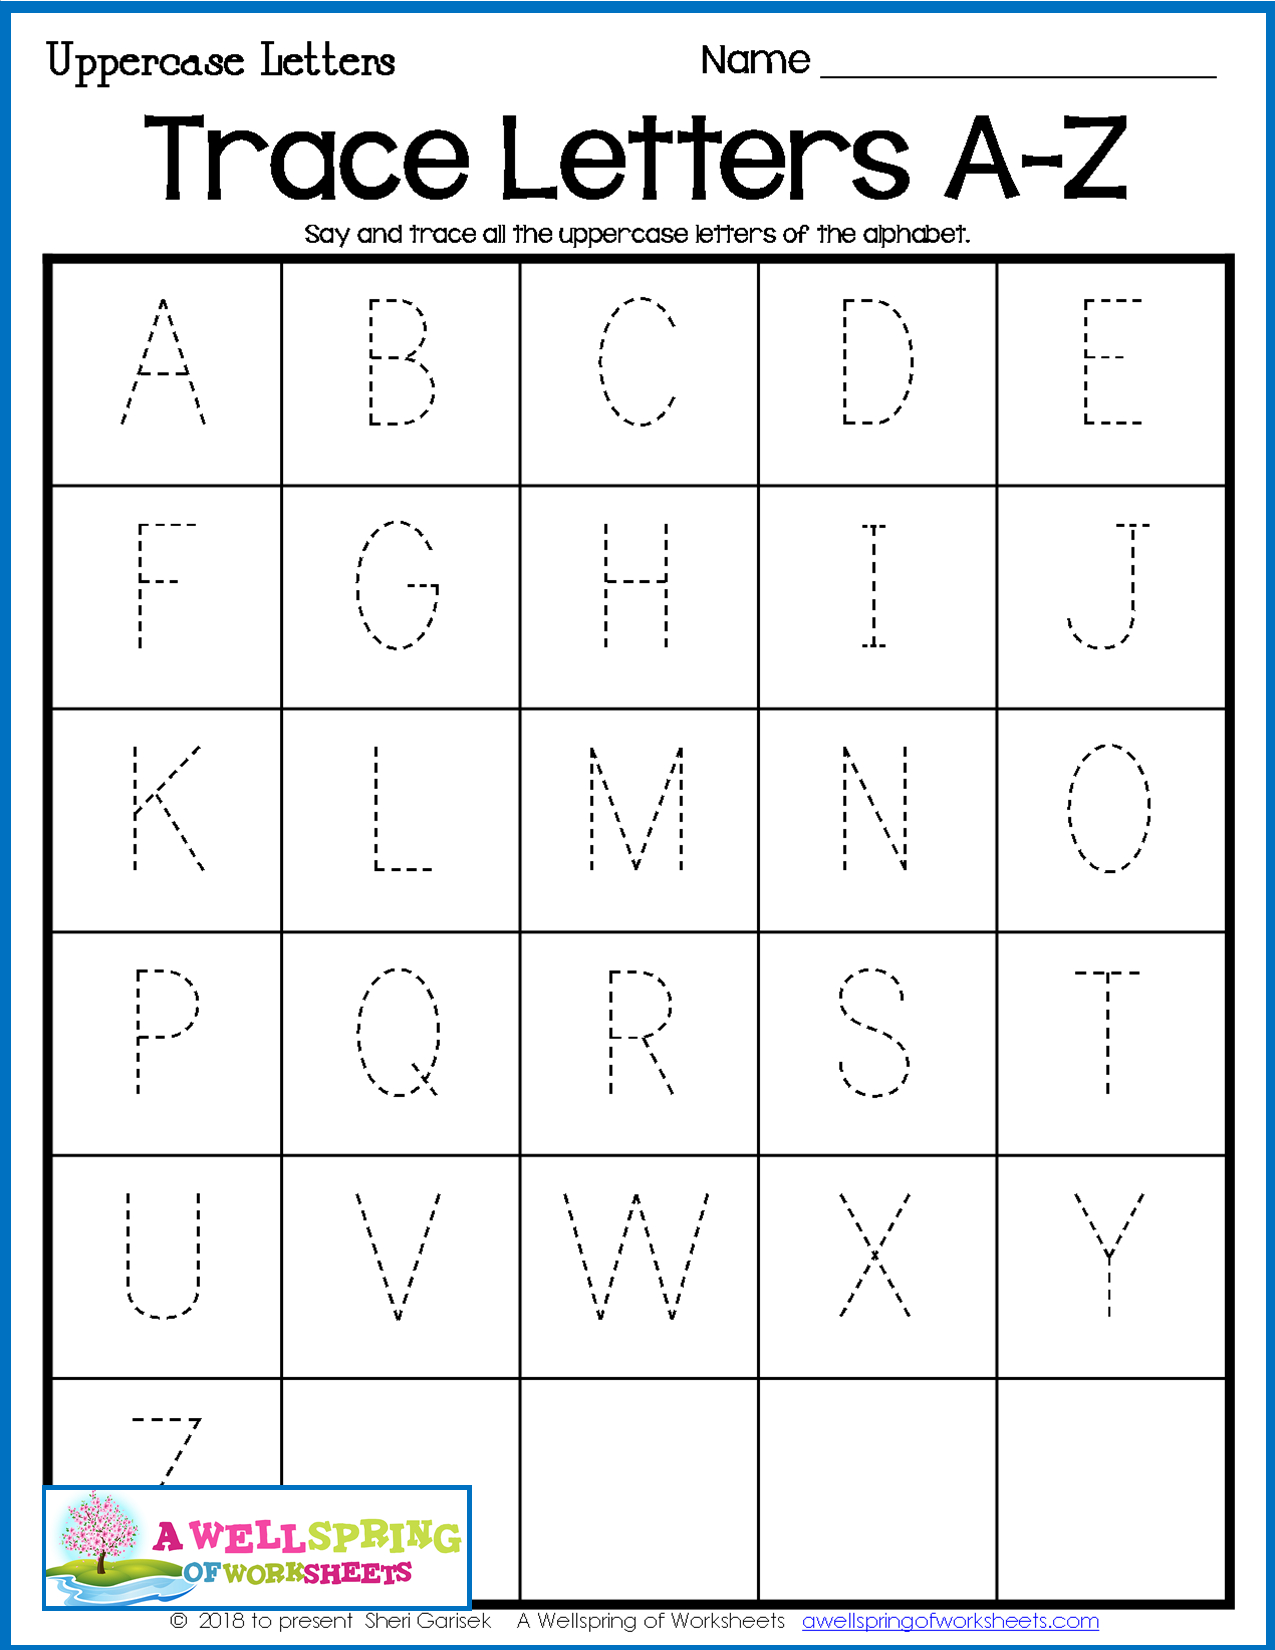 Coloring Book : Alphabetg Worksheets Coloring Book for Tracing Letters And Numbers Worksheets Pdf